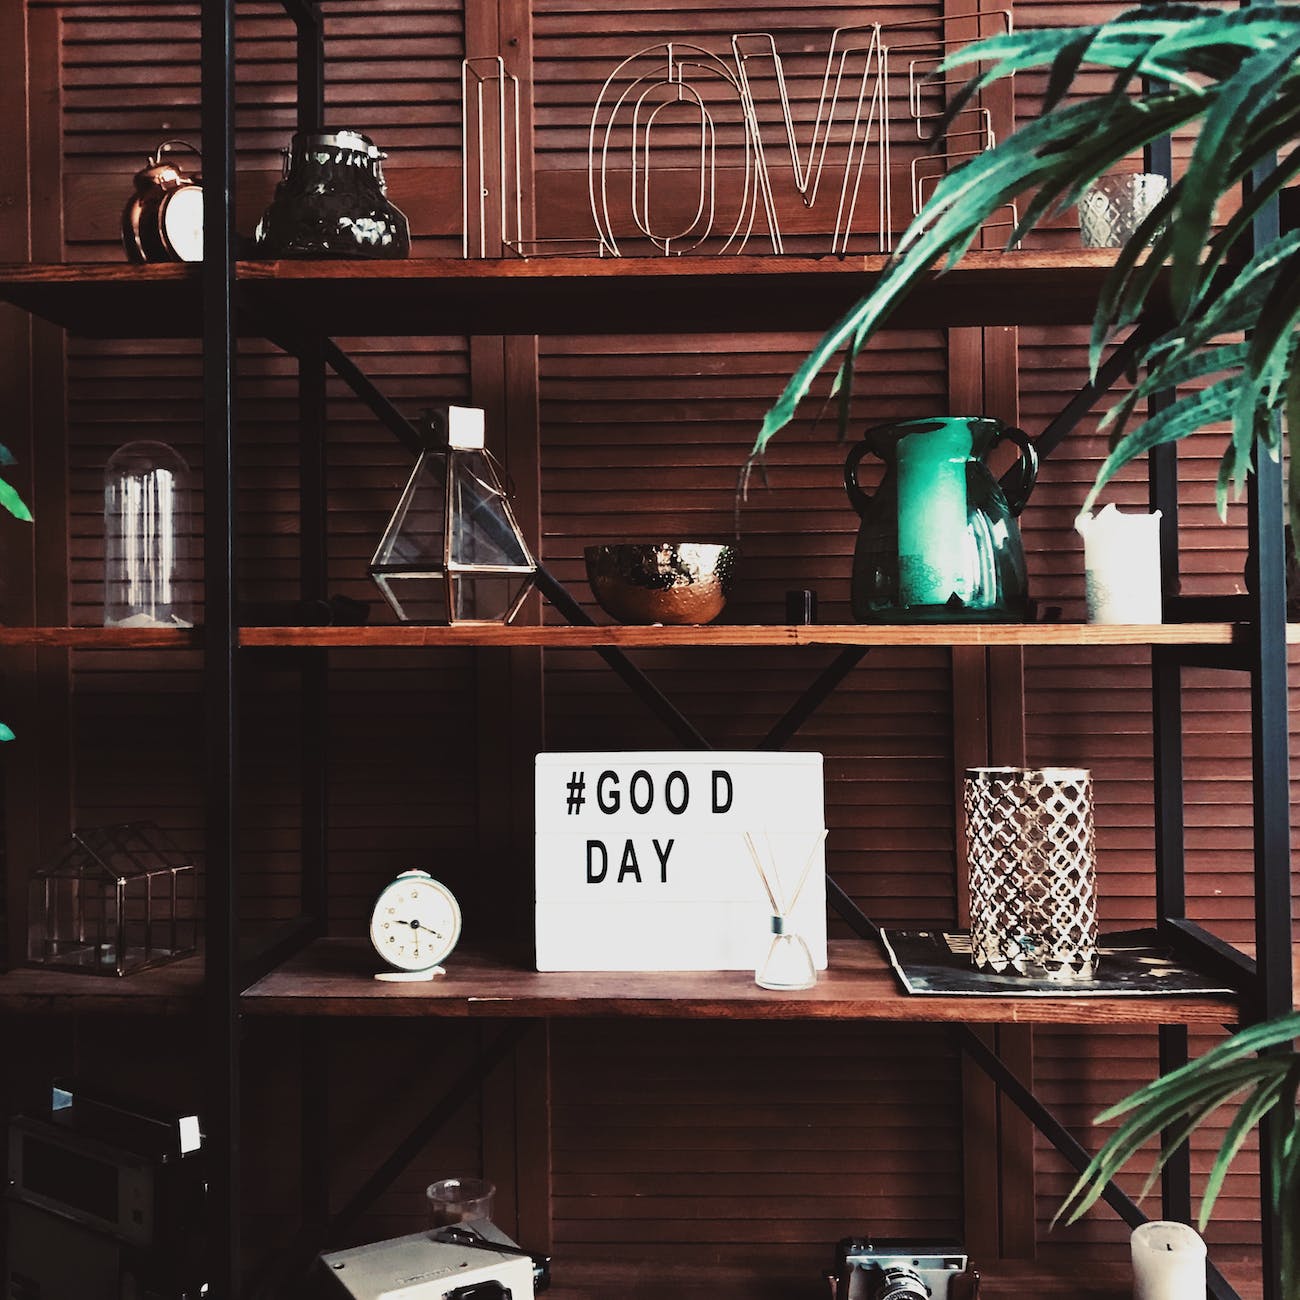 shelves with decor and good day wish board